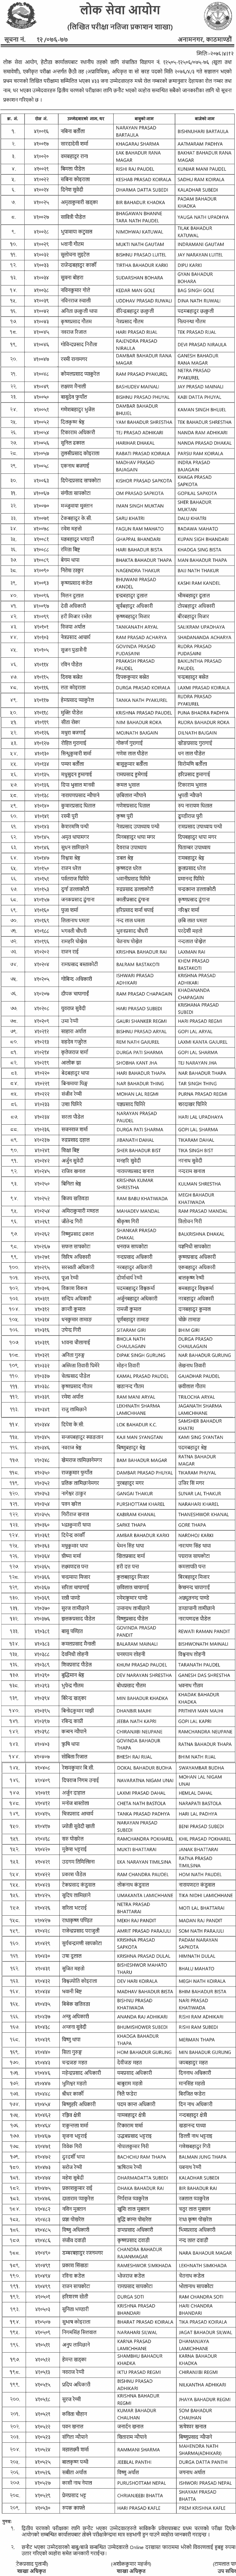 Local Level Non-Technical 6th Level First Phase Result - Hetauda